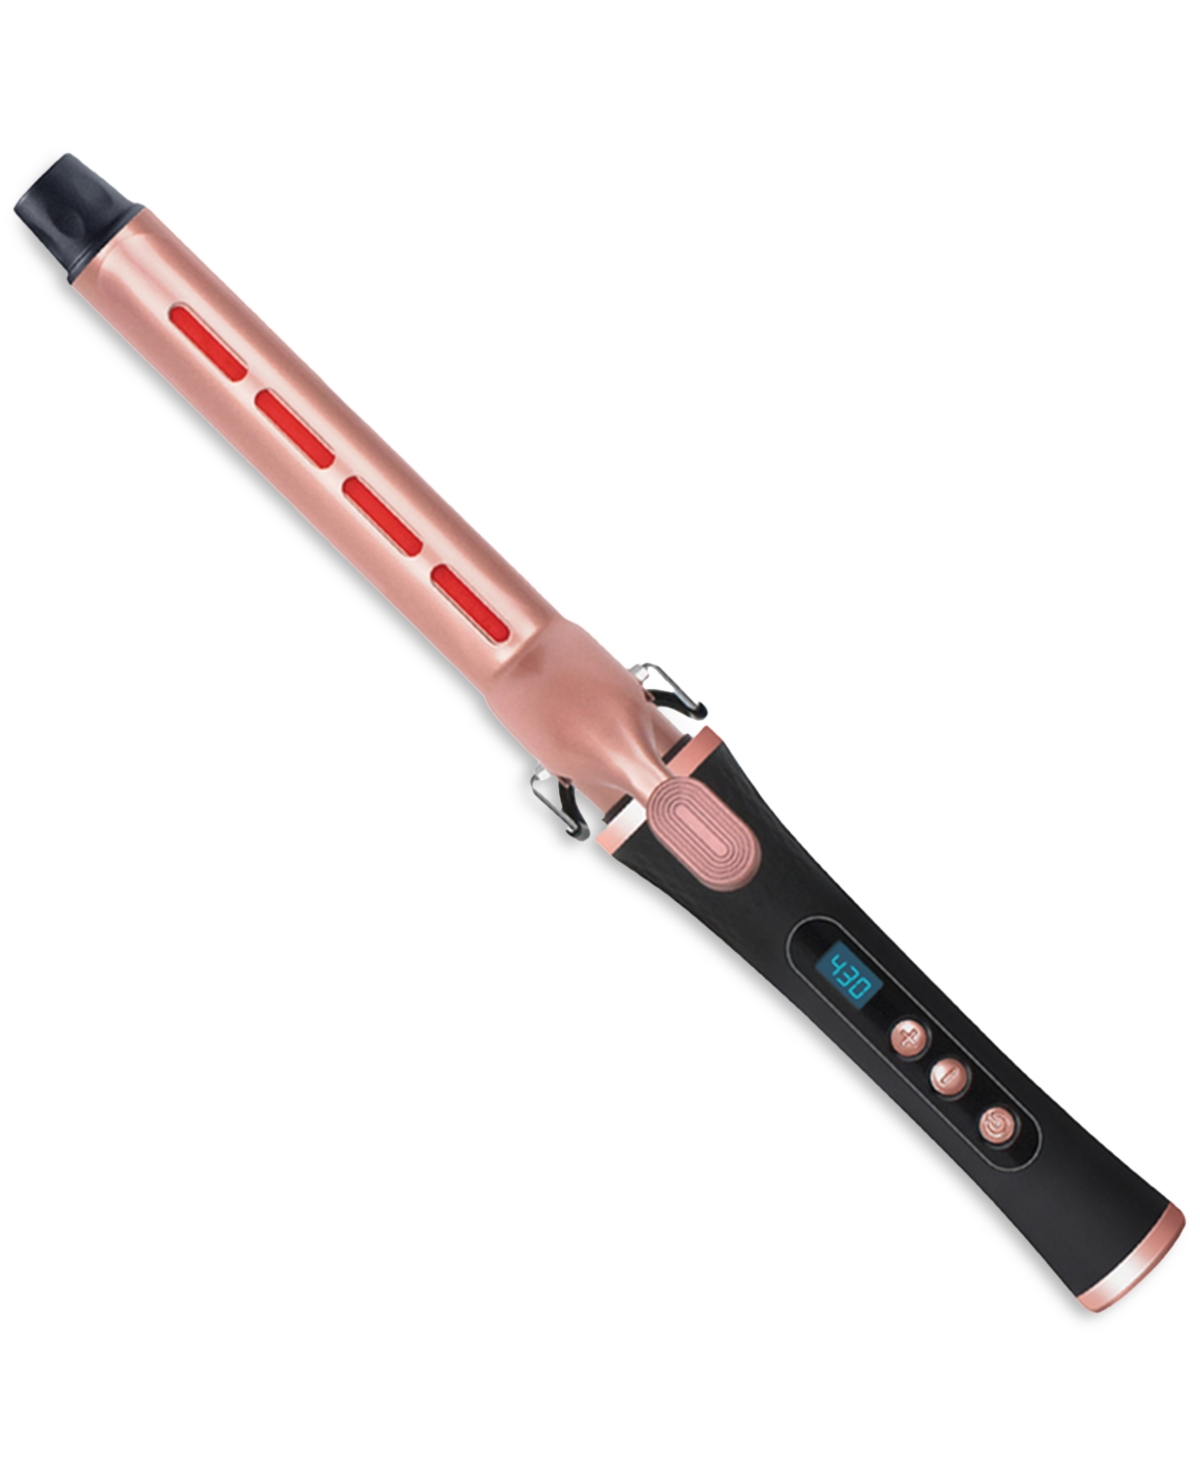 IR2 Infrared Curling Iron - 28 mm - Black And Rose Gold